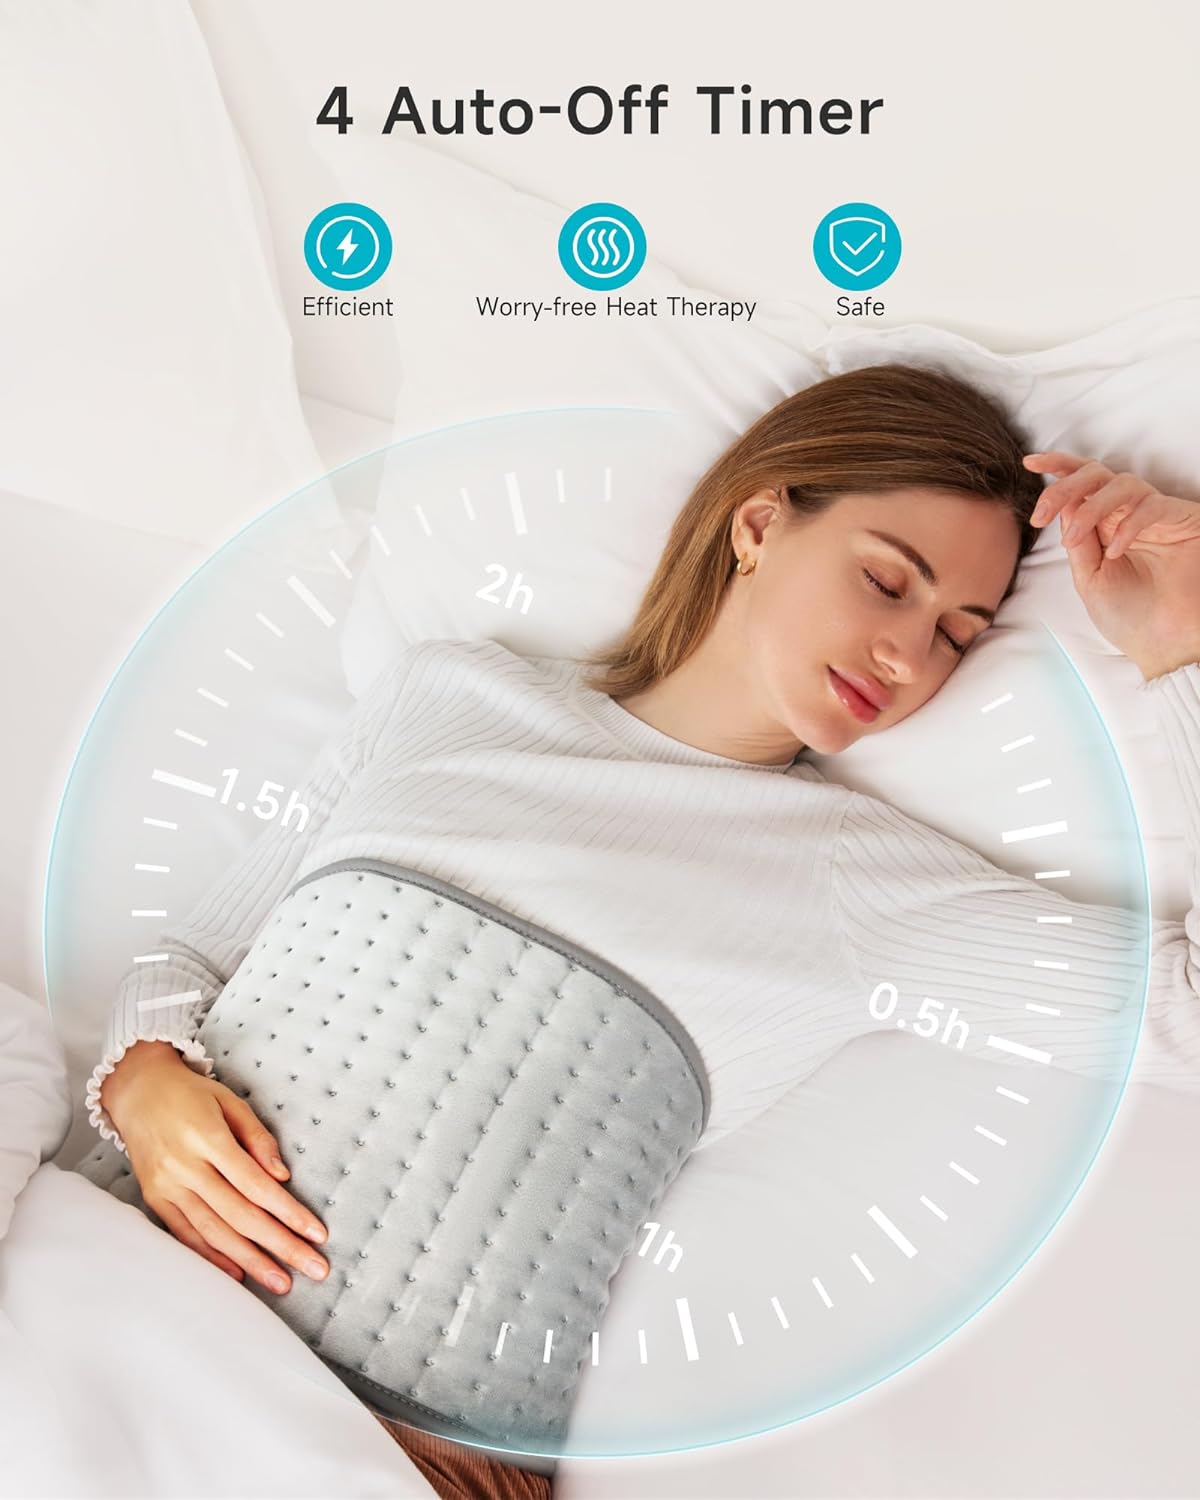 ALLJOY Waist Heating Pad for Cramps